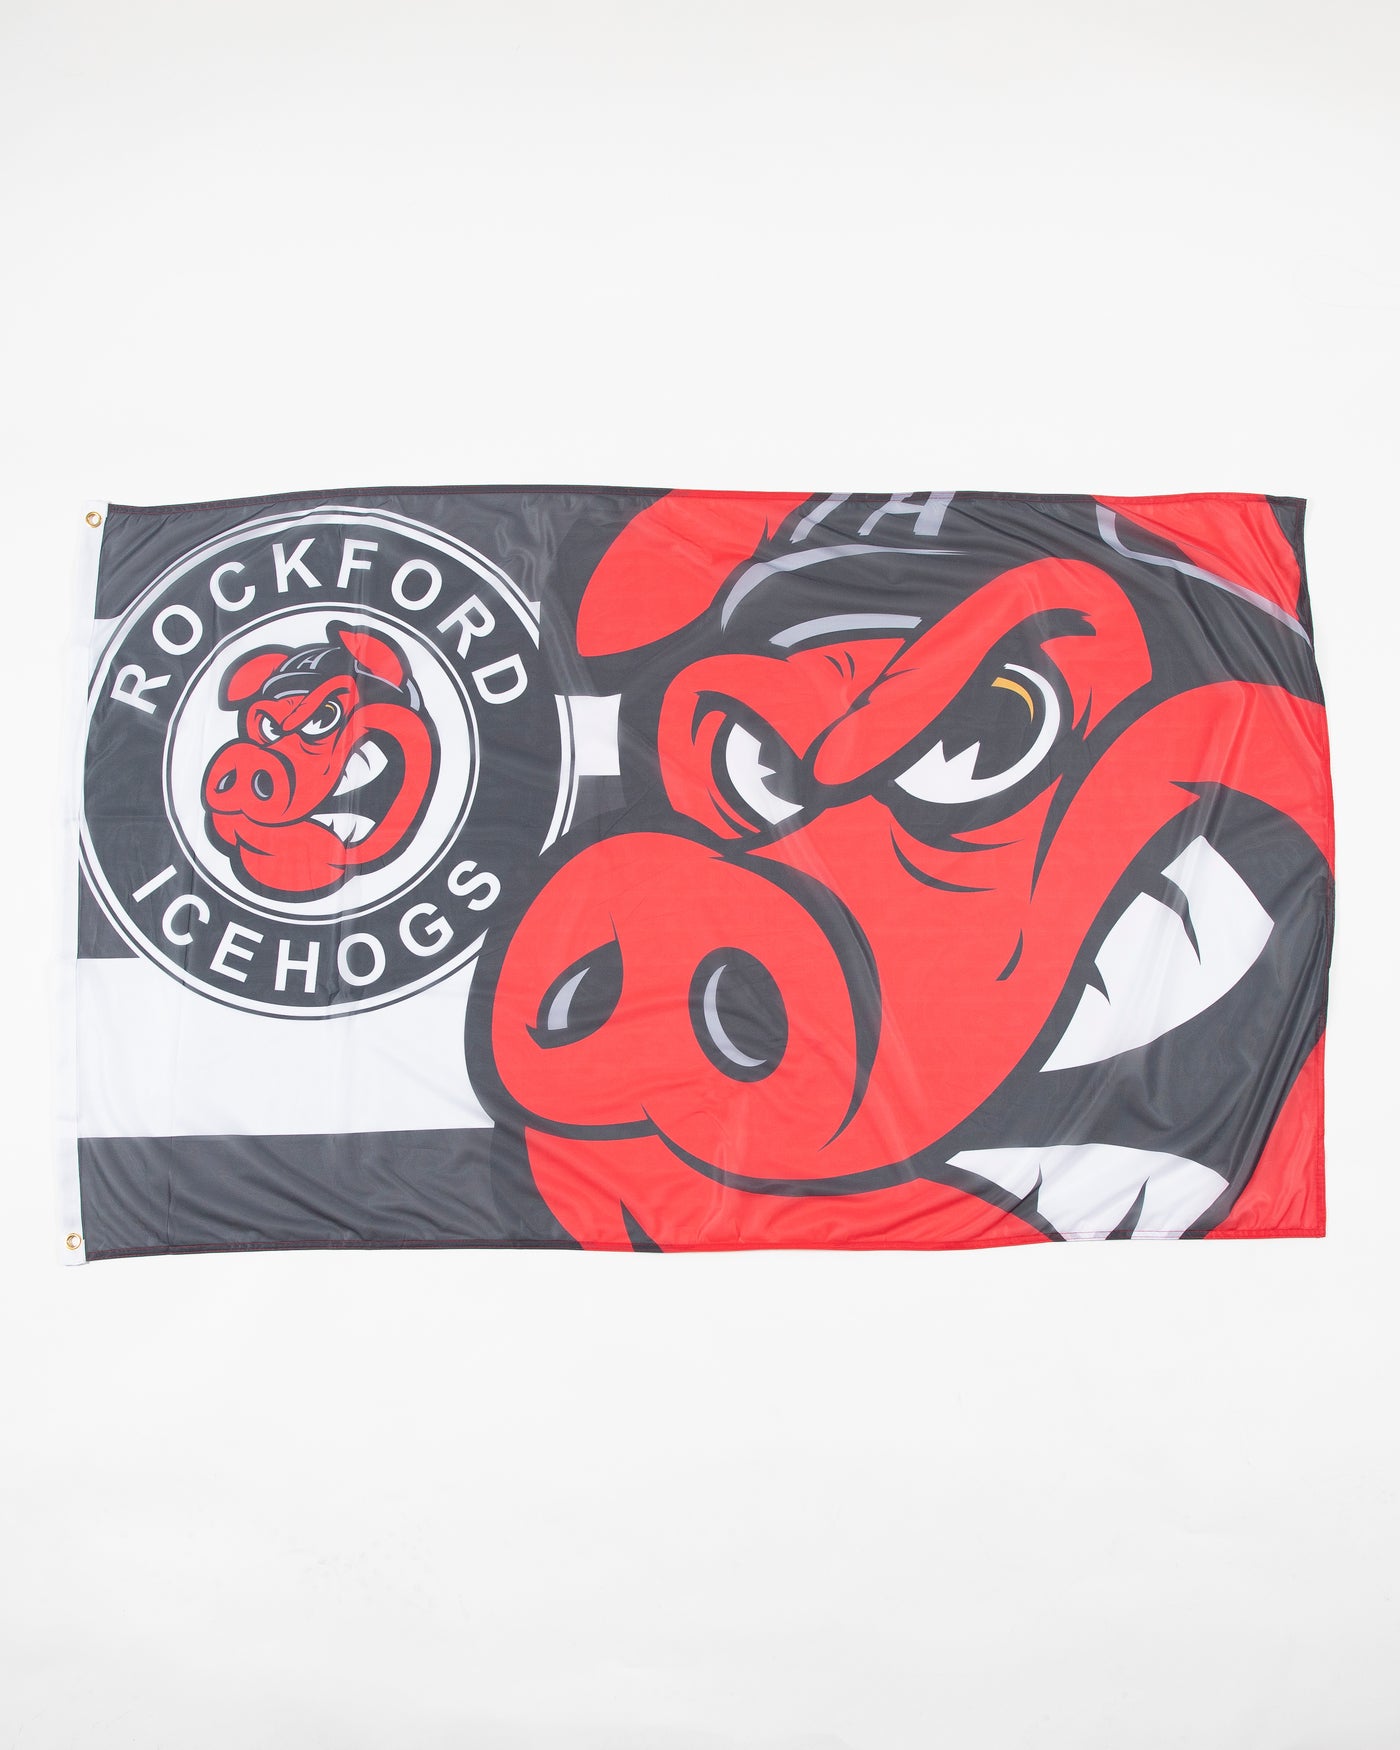 Rockford IceHogs house flag 3x5 with logo and mascot - front lay flat